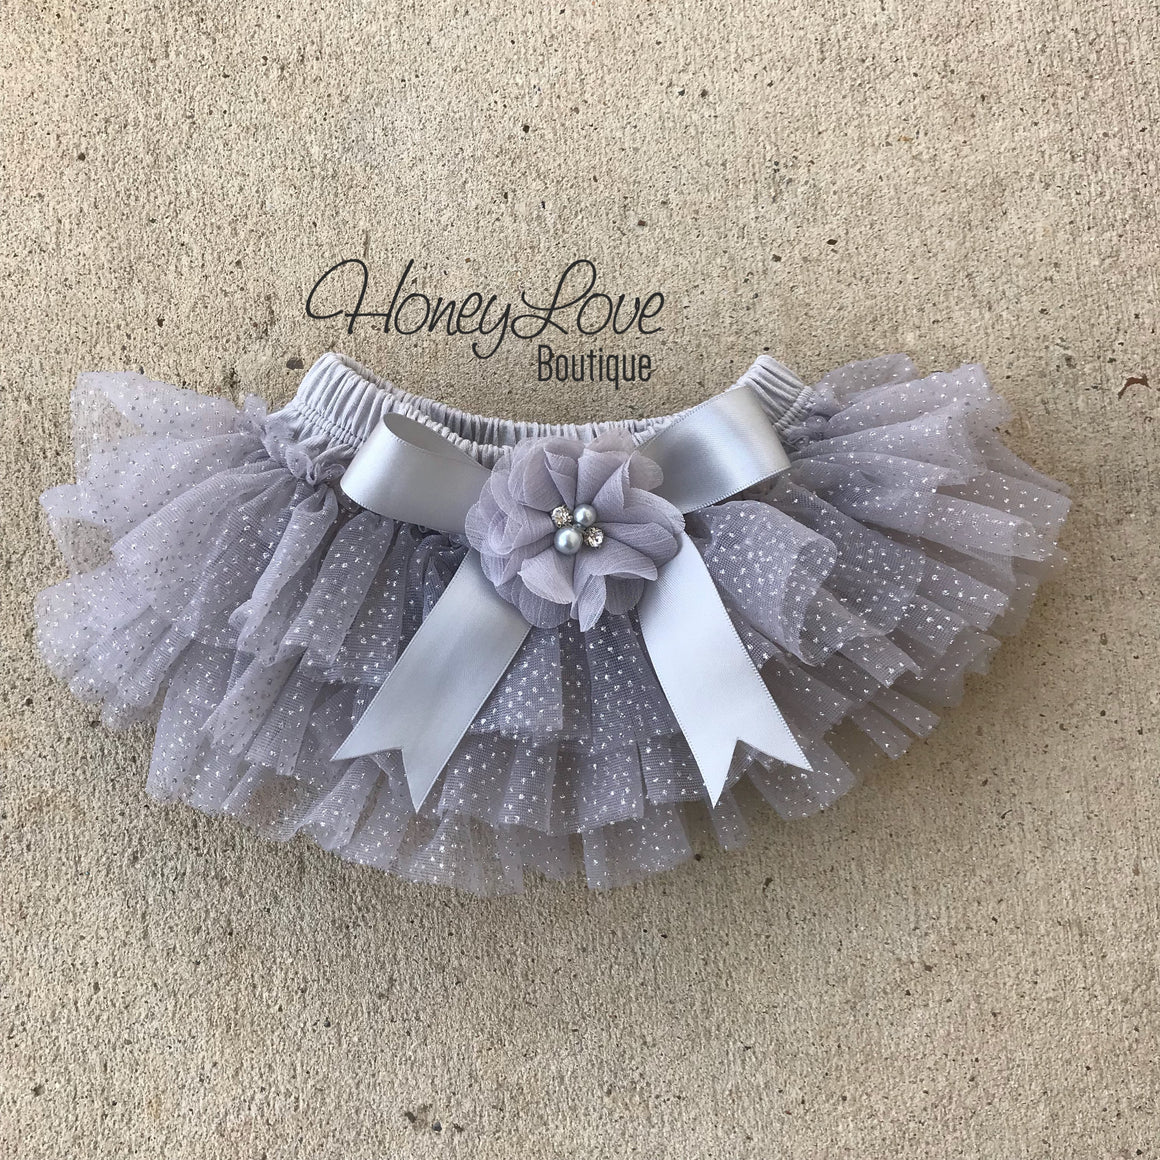 Personalized Name inside Heart - Gray and Silver Glitter - embellished tutu skirt bloomers - HoneyLoveBoutique